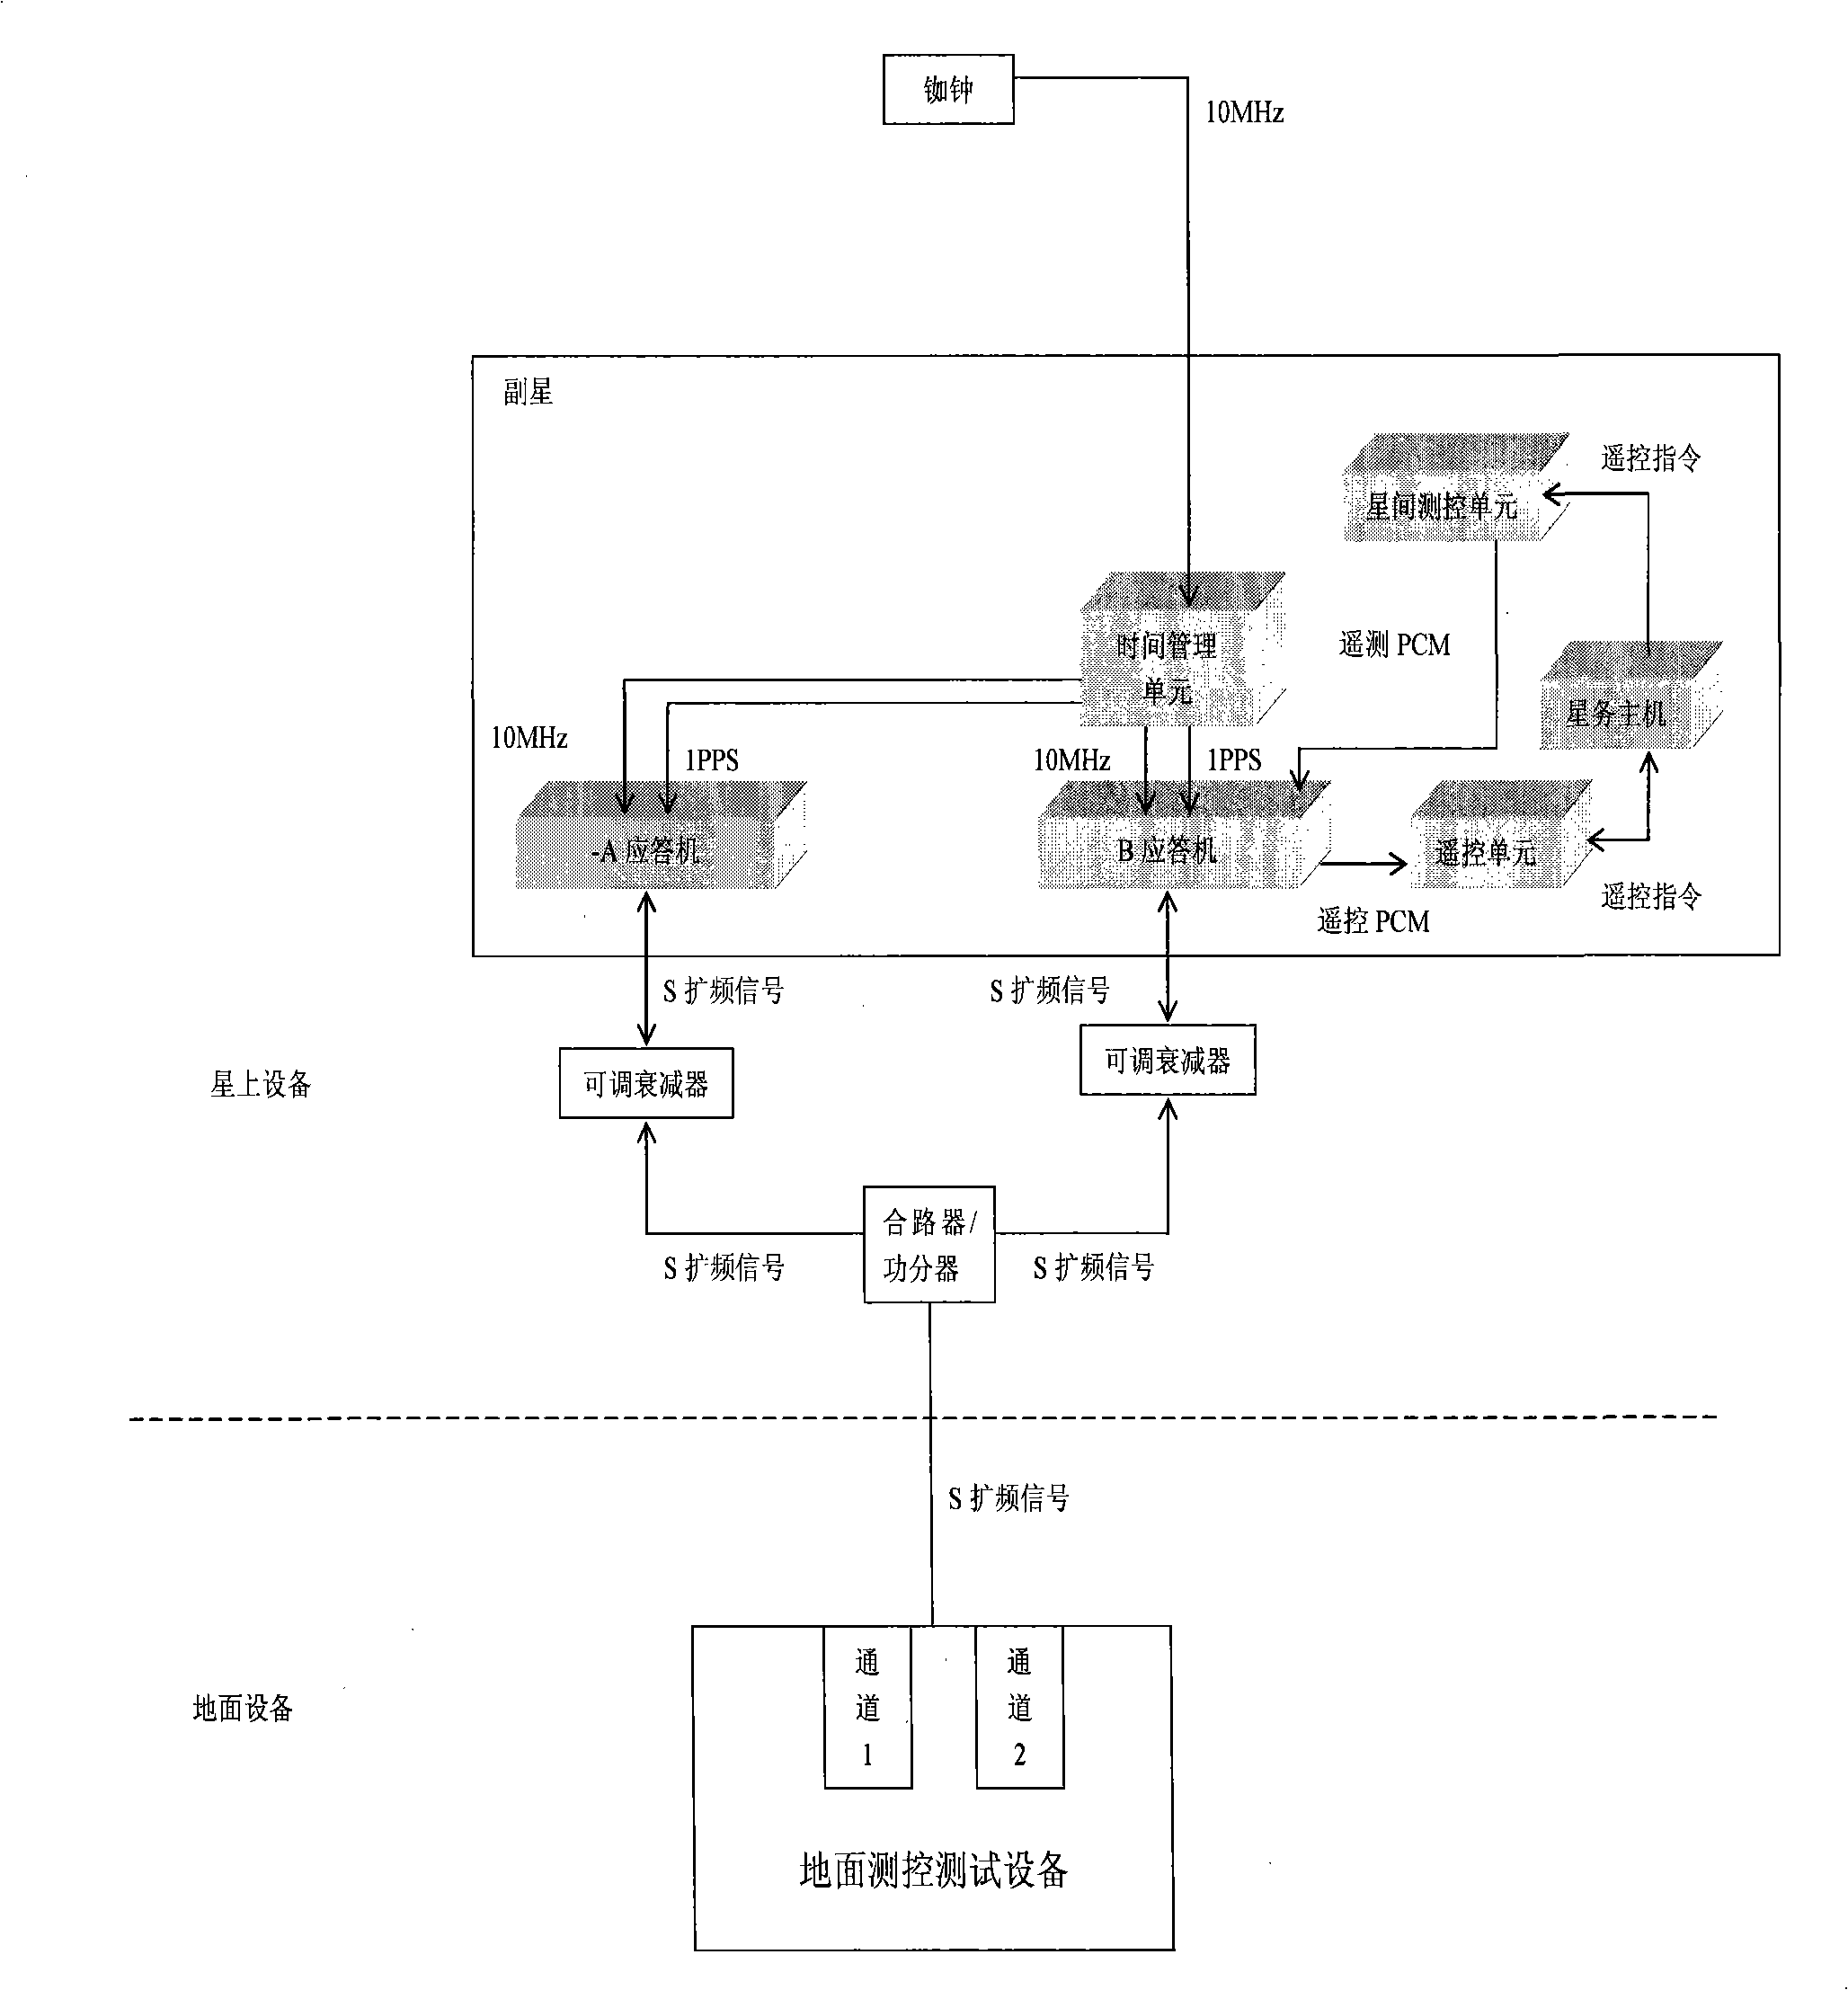 Method for implementing split-second precision synchronism using spread-spectrum answering machine